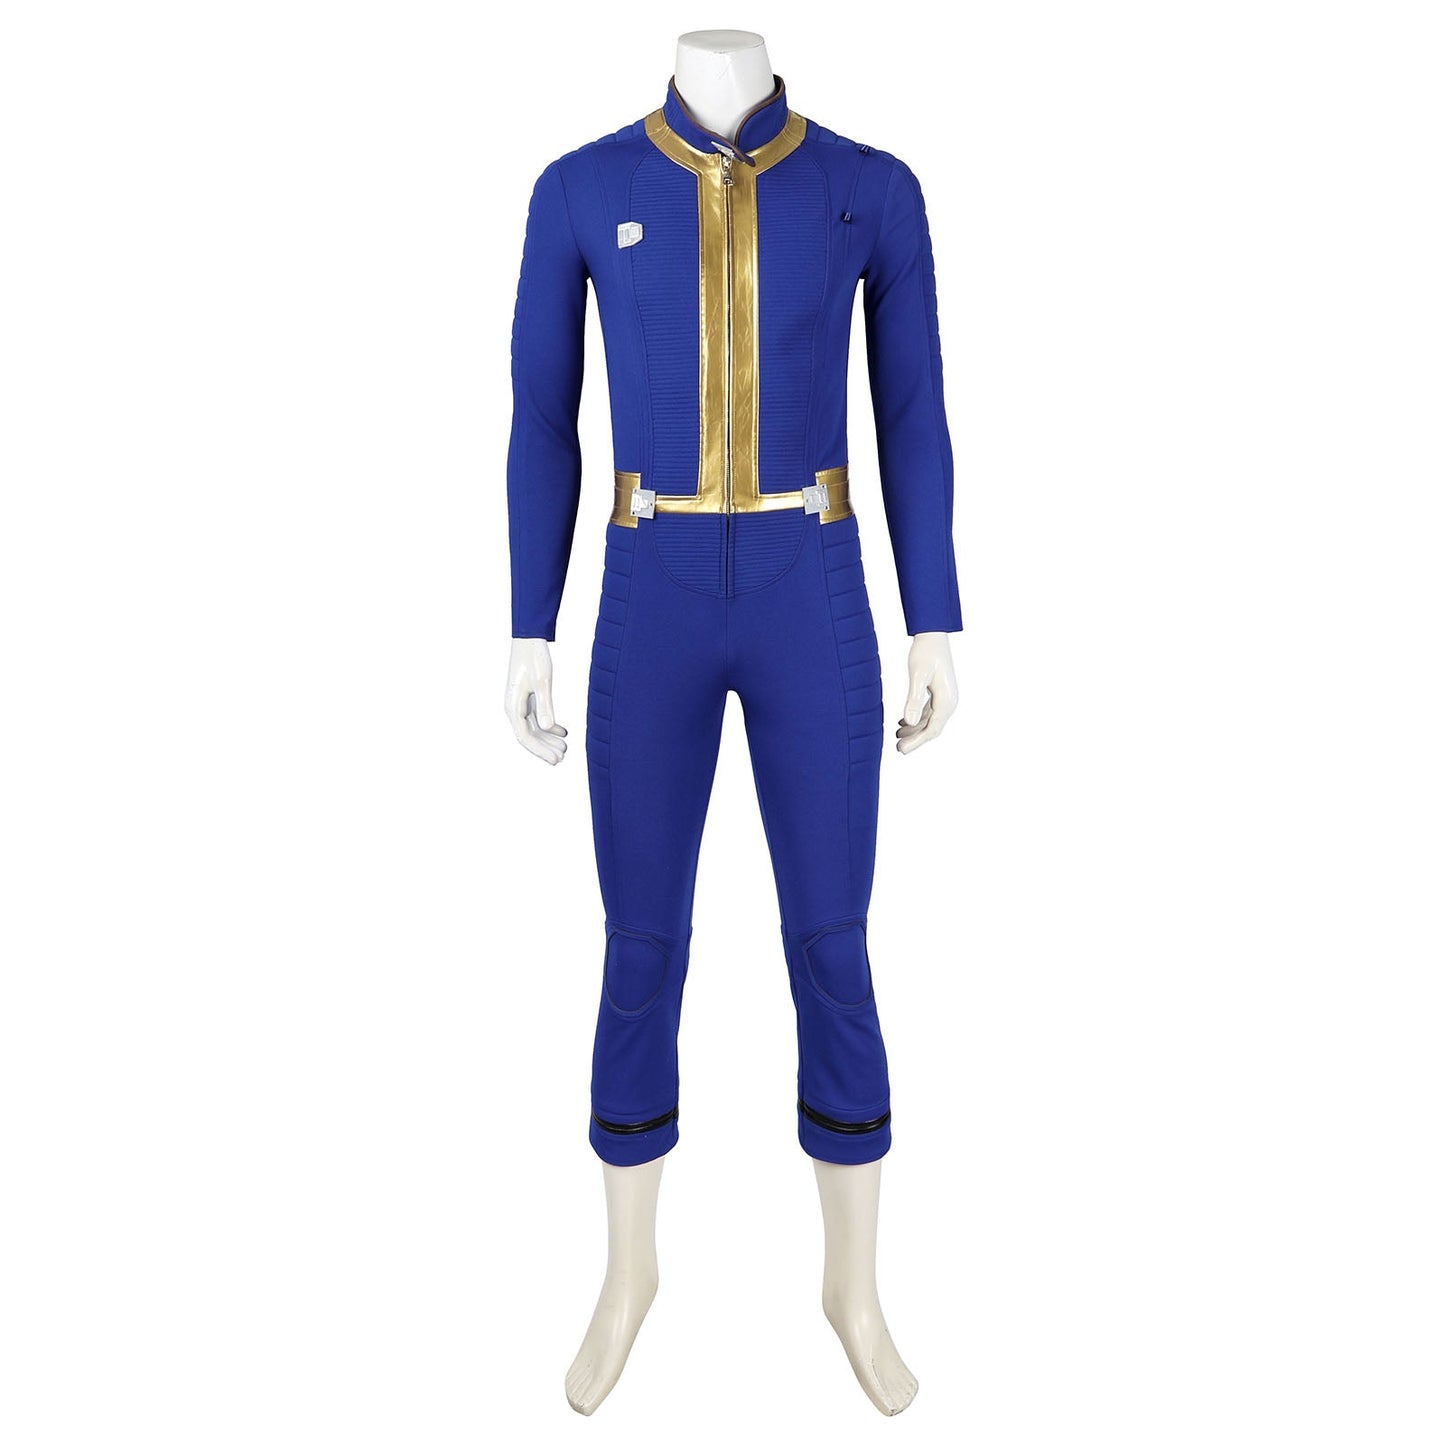 Game Fallout 4 Vault No. 75 Sheltersuit Male Full Set Cosplay Costumes